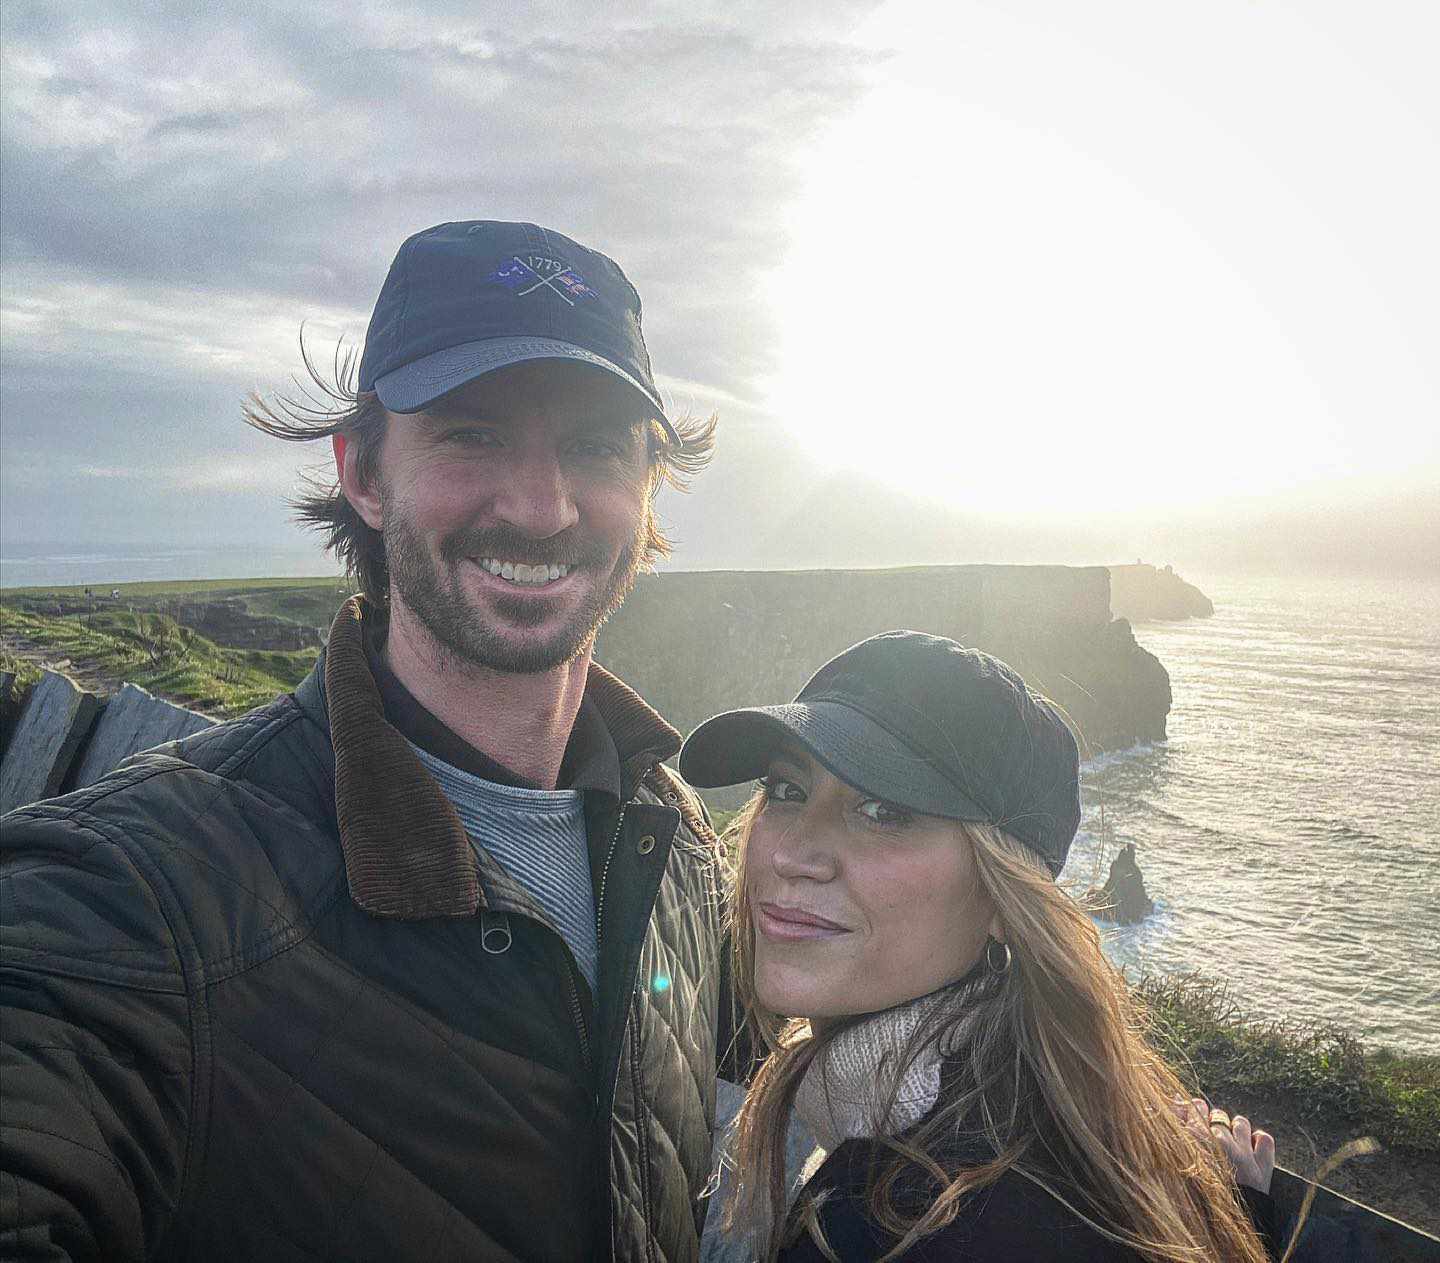 https://www.instagram.com/p/CqTpwArLItV/?hl=en Verified Can’t believe I get to marry the girl of my dreams in less than one month! ❤️ #ireland #wedding #cliffsofmoher